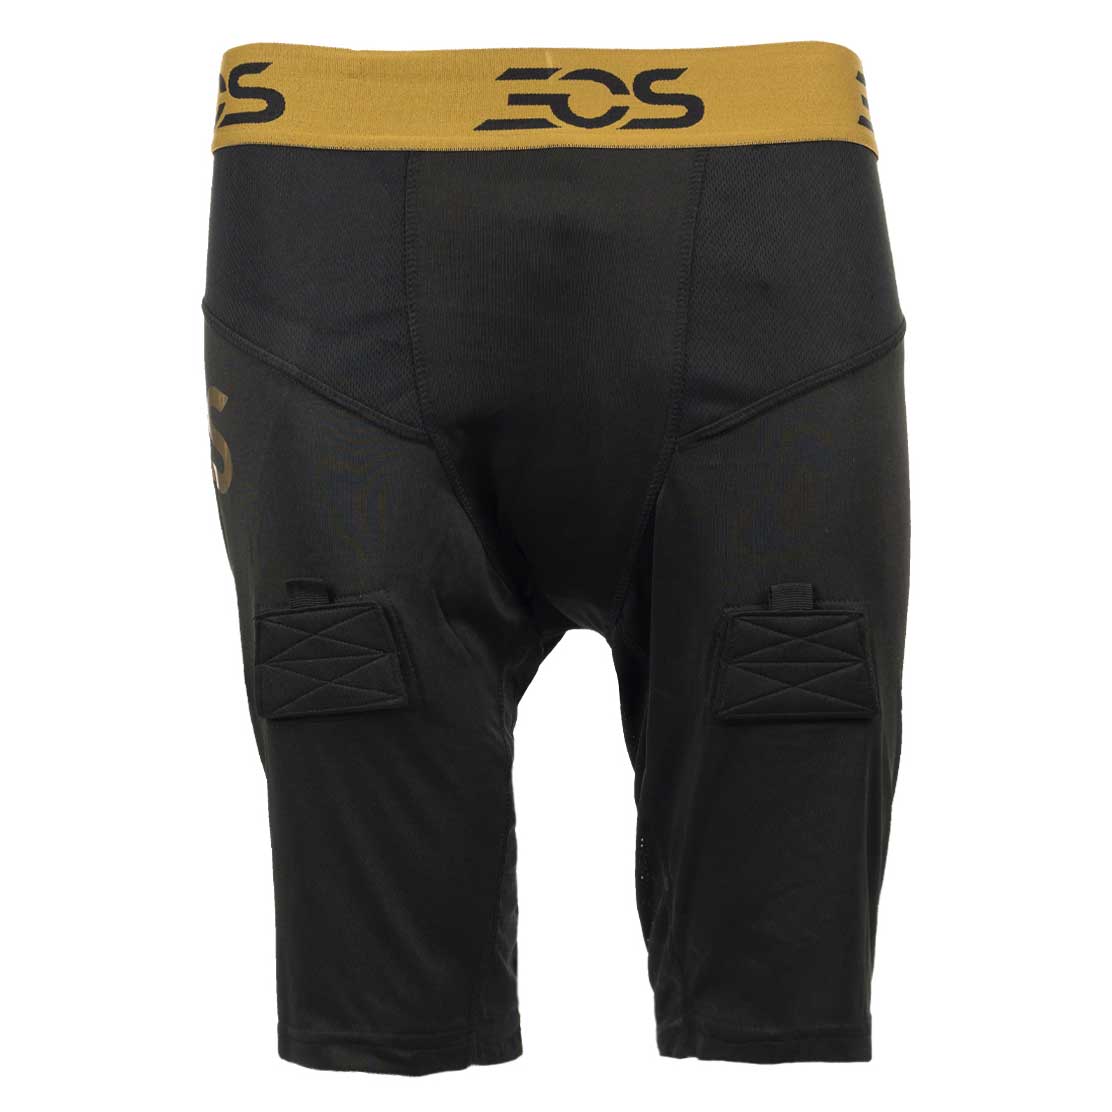 Front view picture of the EOS Ti50 Ice Hockey Compression Shorts with Jill (Senior)